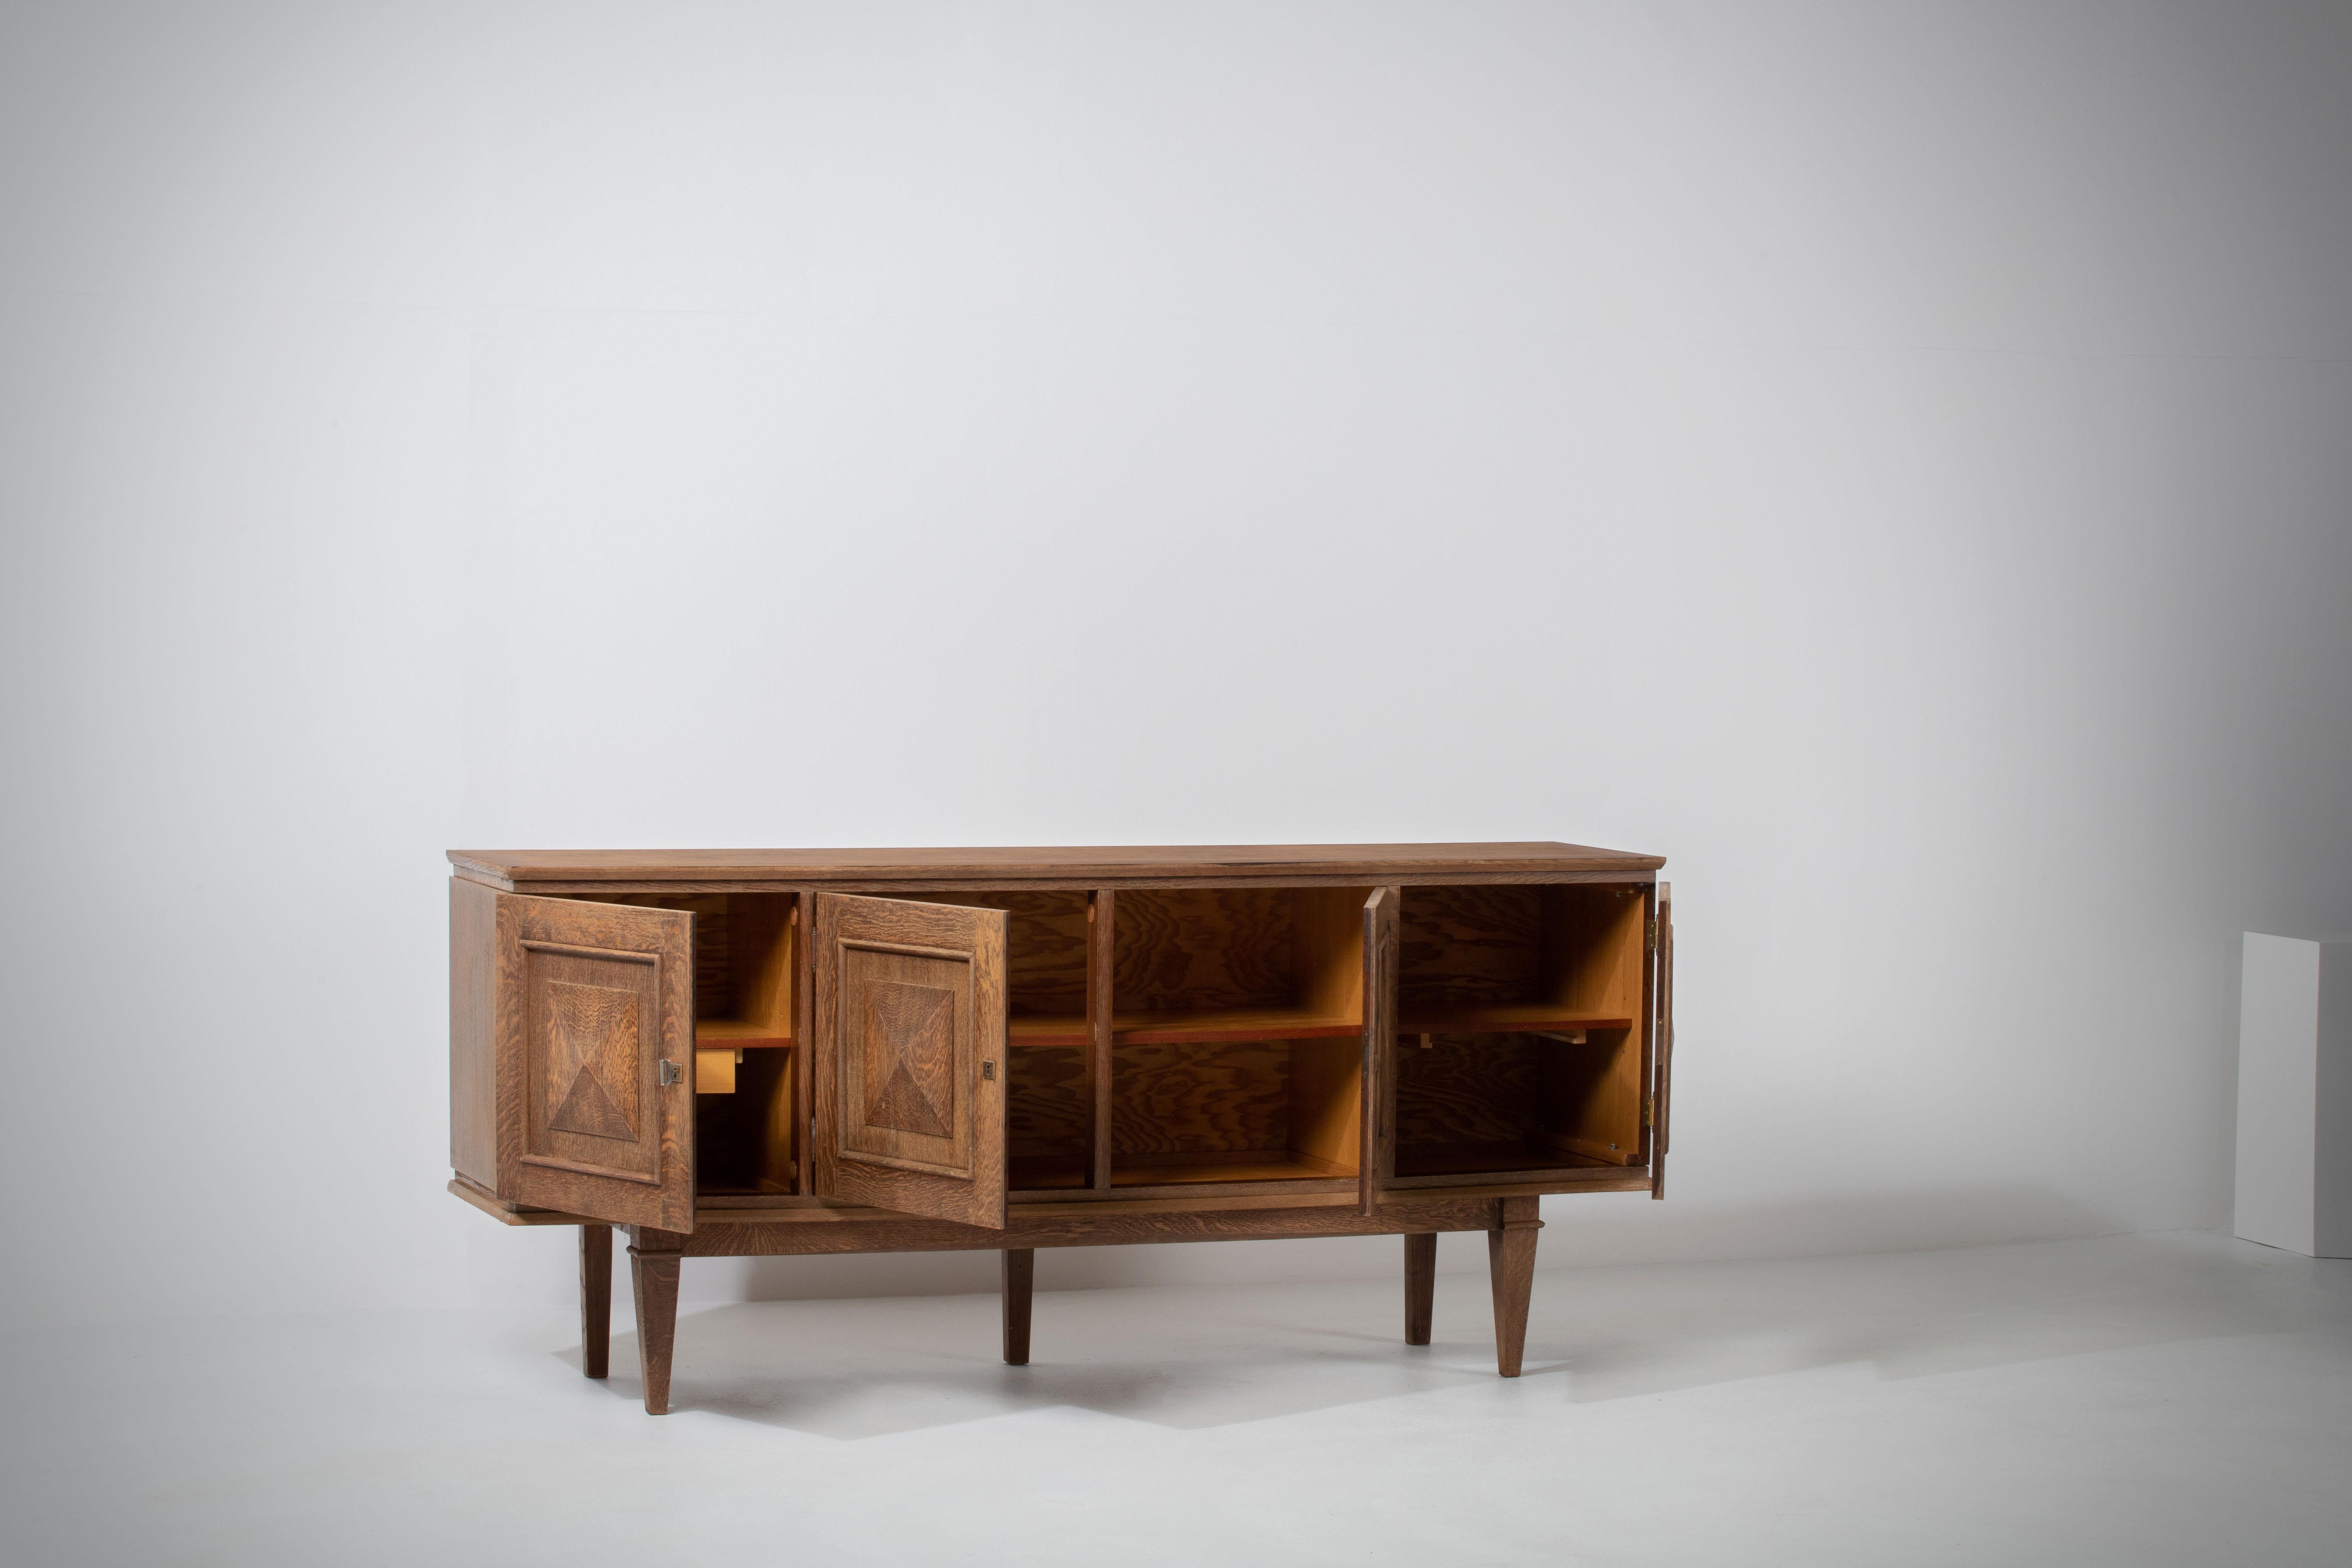 Credenza, solid oak, France, 1940s.
Large Art Deco Brutalist sideboard. 
The credenza consists of two storage facilities covered with very graphical designed door panels.
 